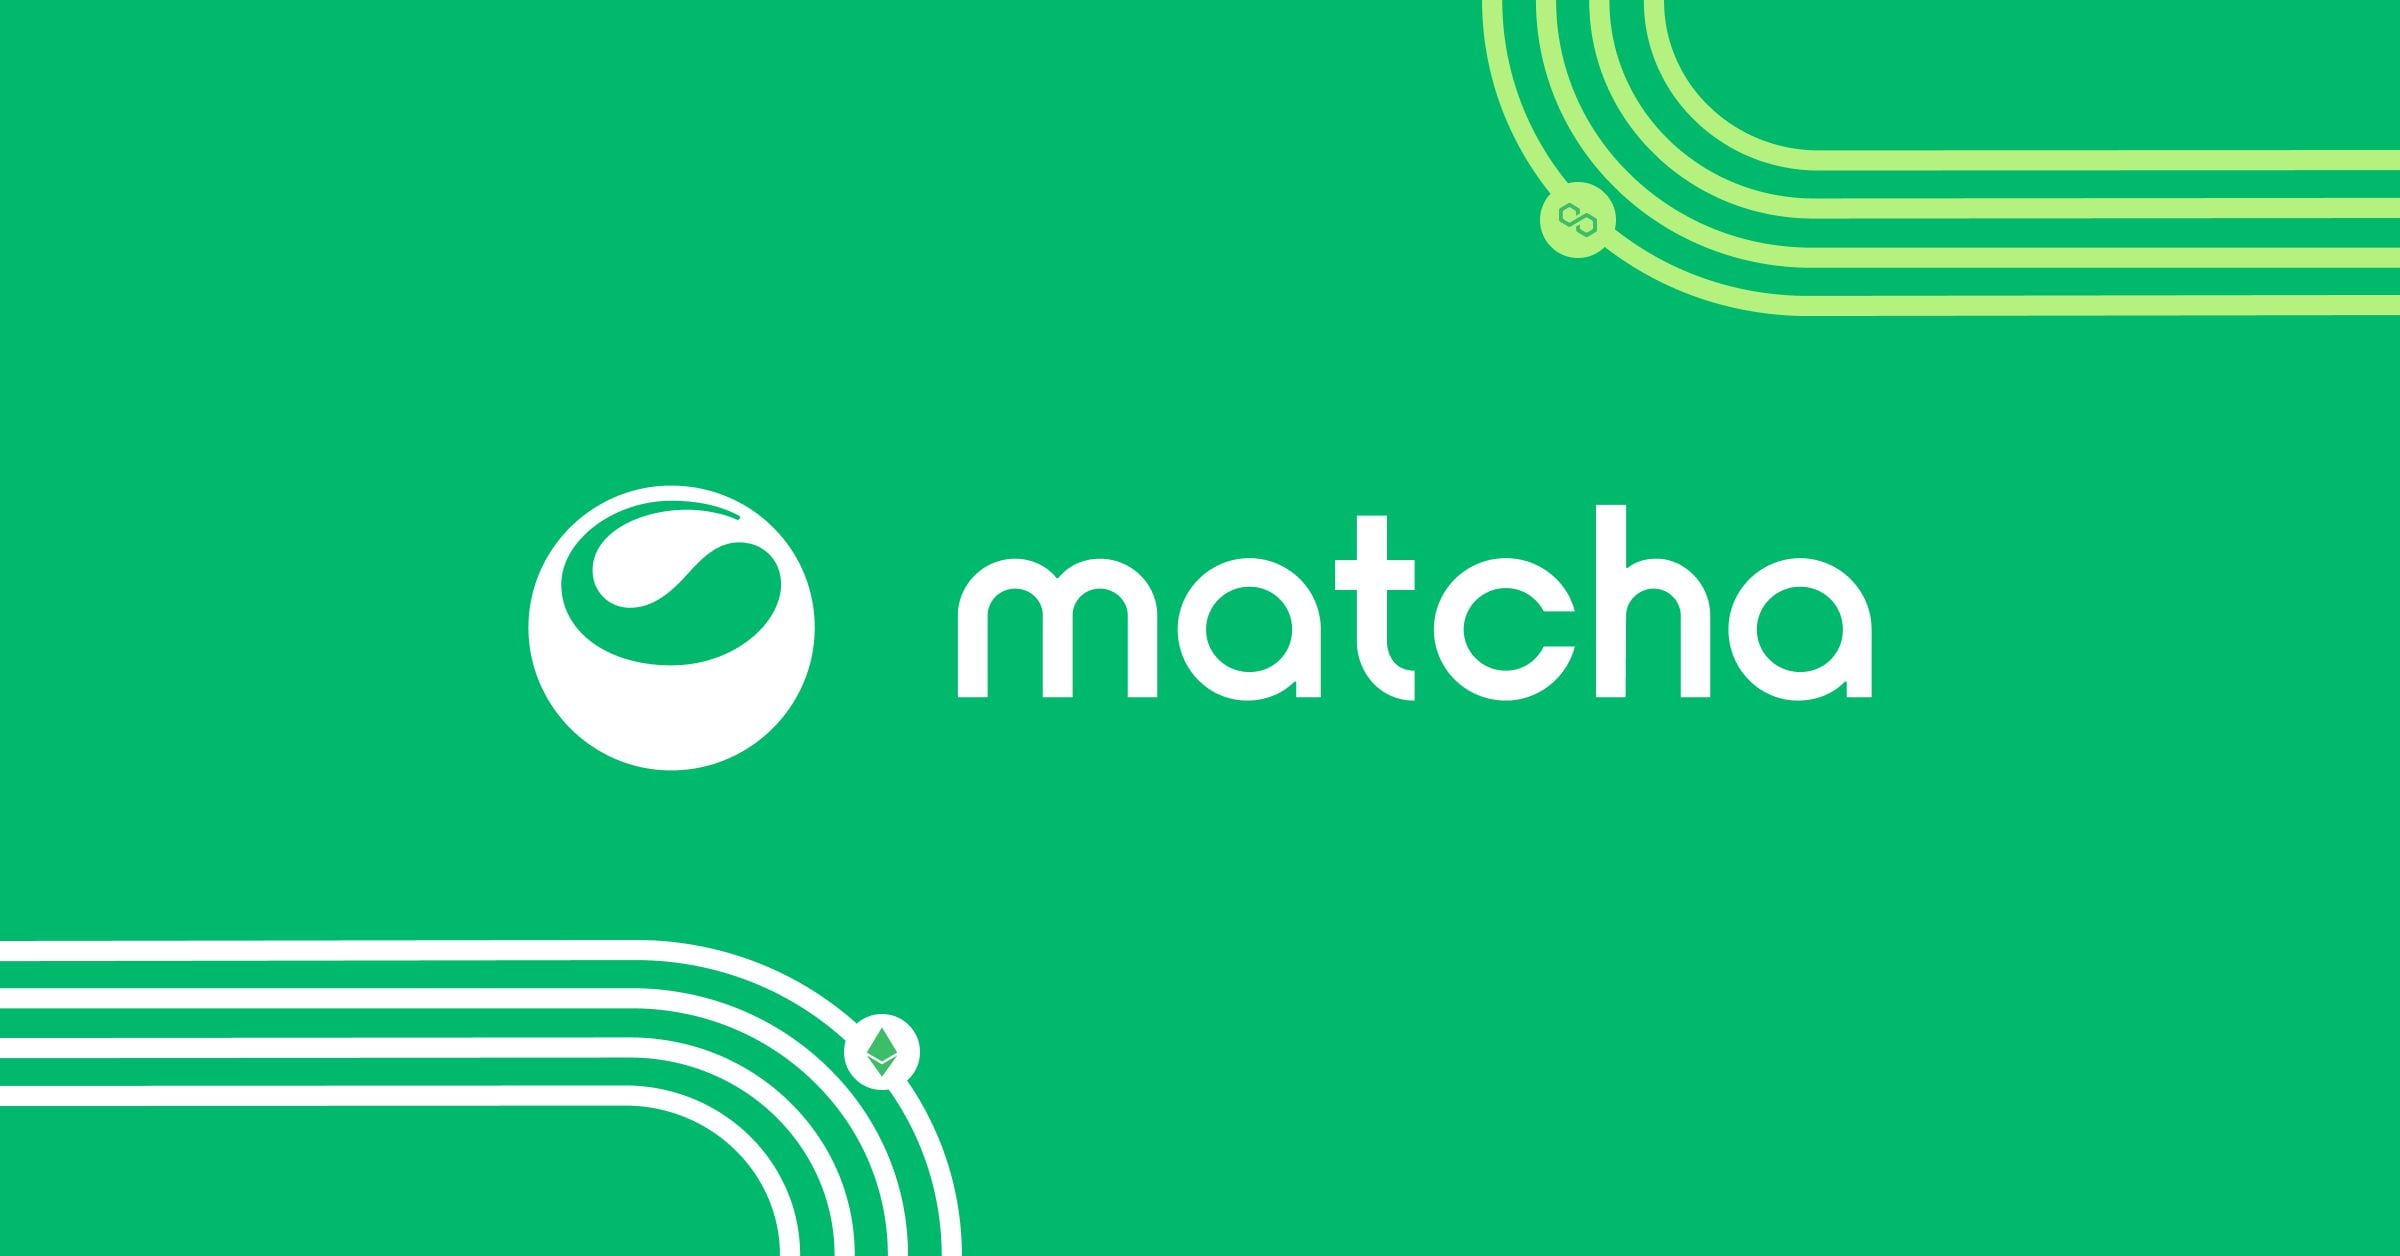 0x releases new Matcha version (0x)